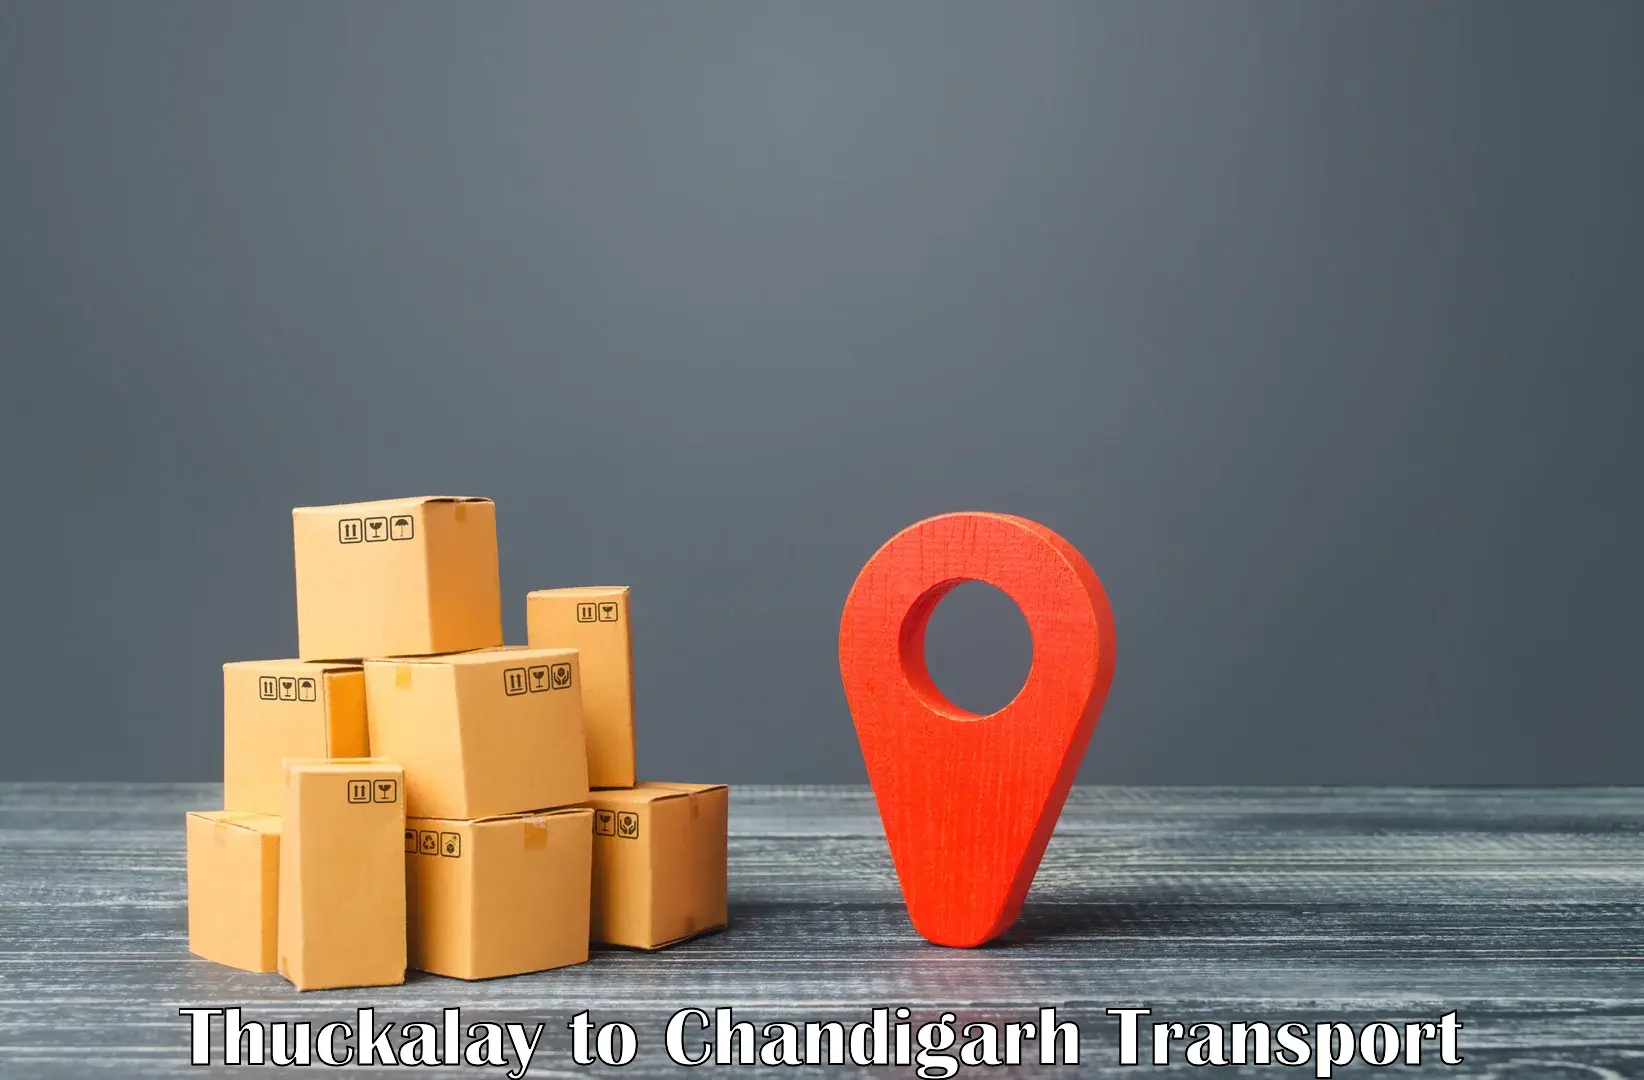 Part load transport service in India Thuckalay to Chandigarh